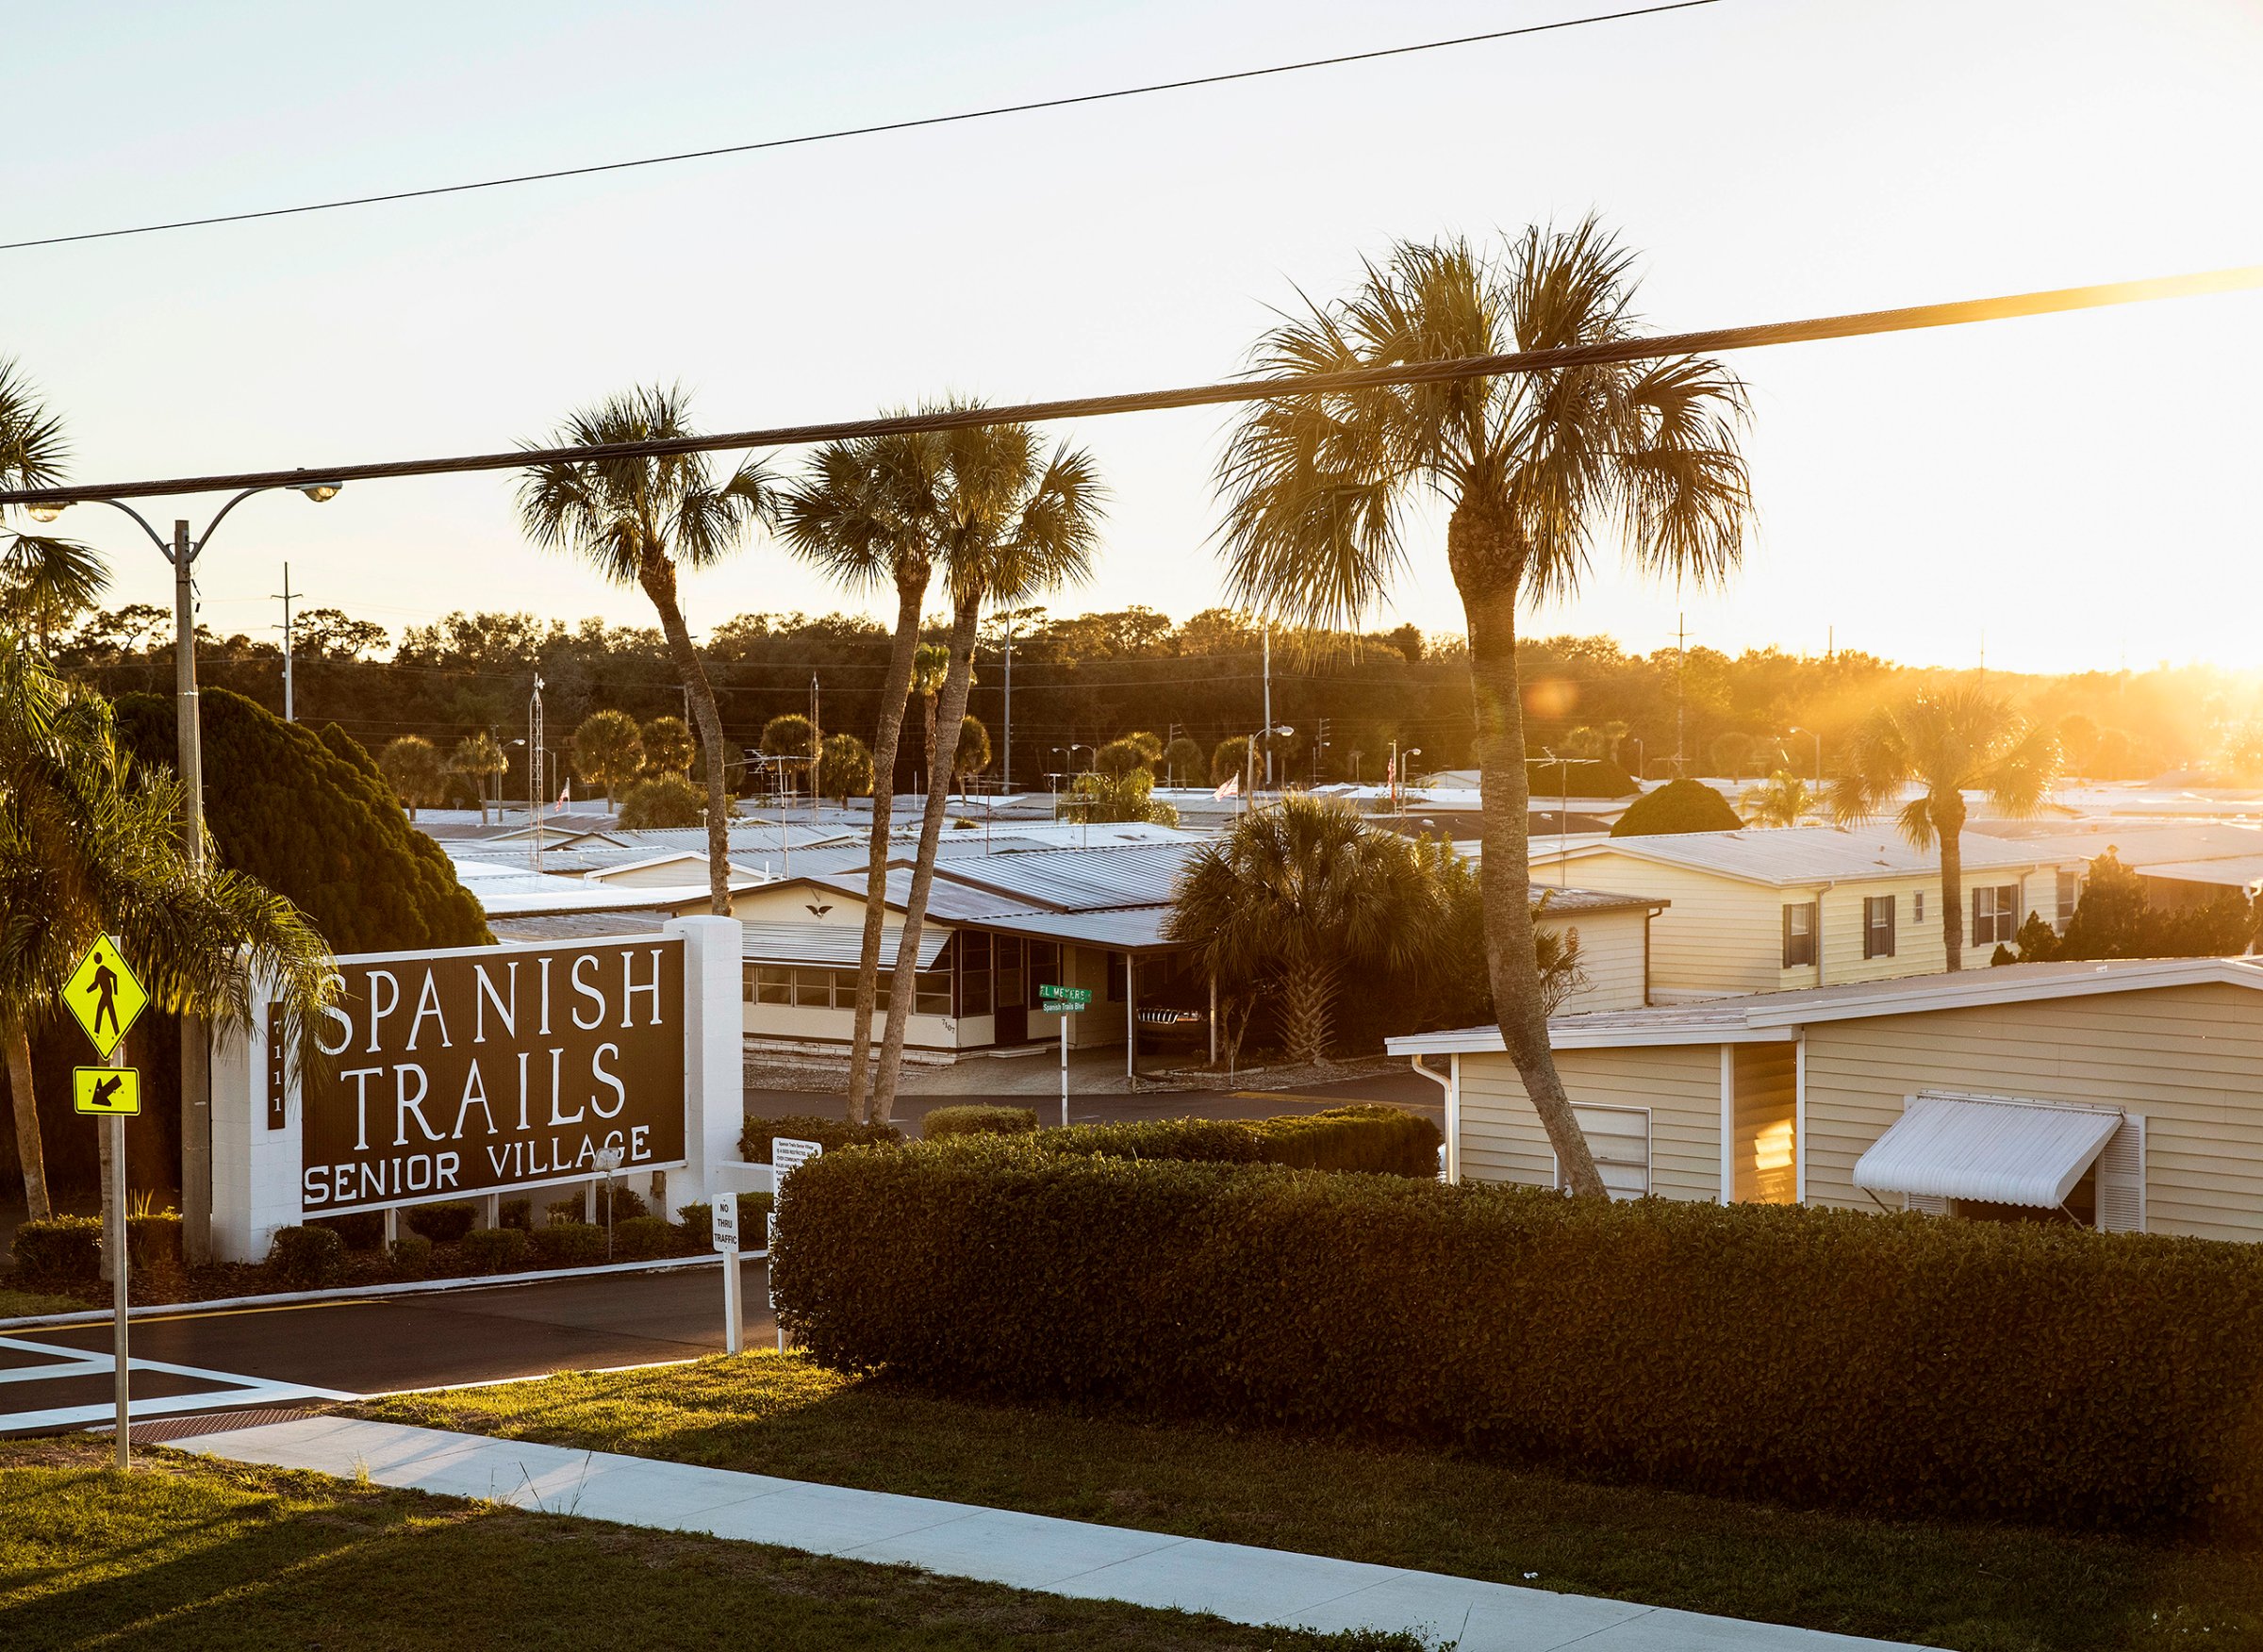 Spanish Trails is among more than 700 Florida trailer parks owned by their residents.